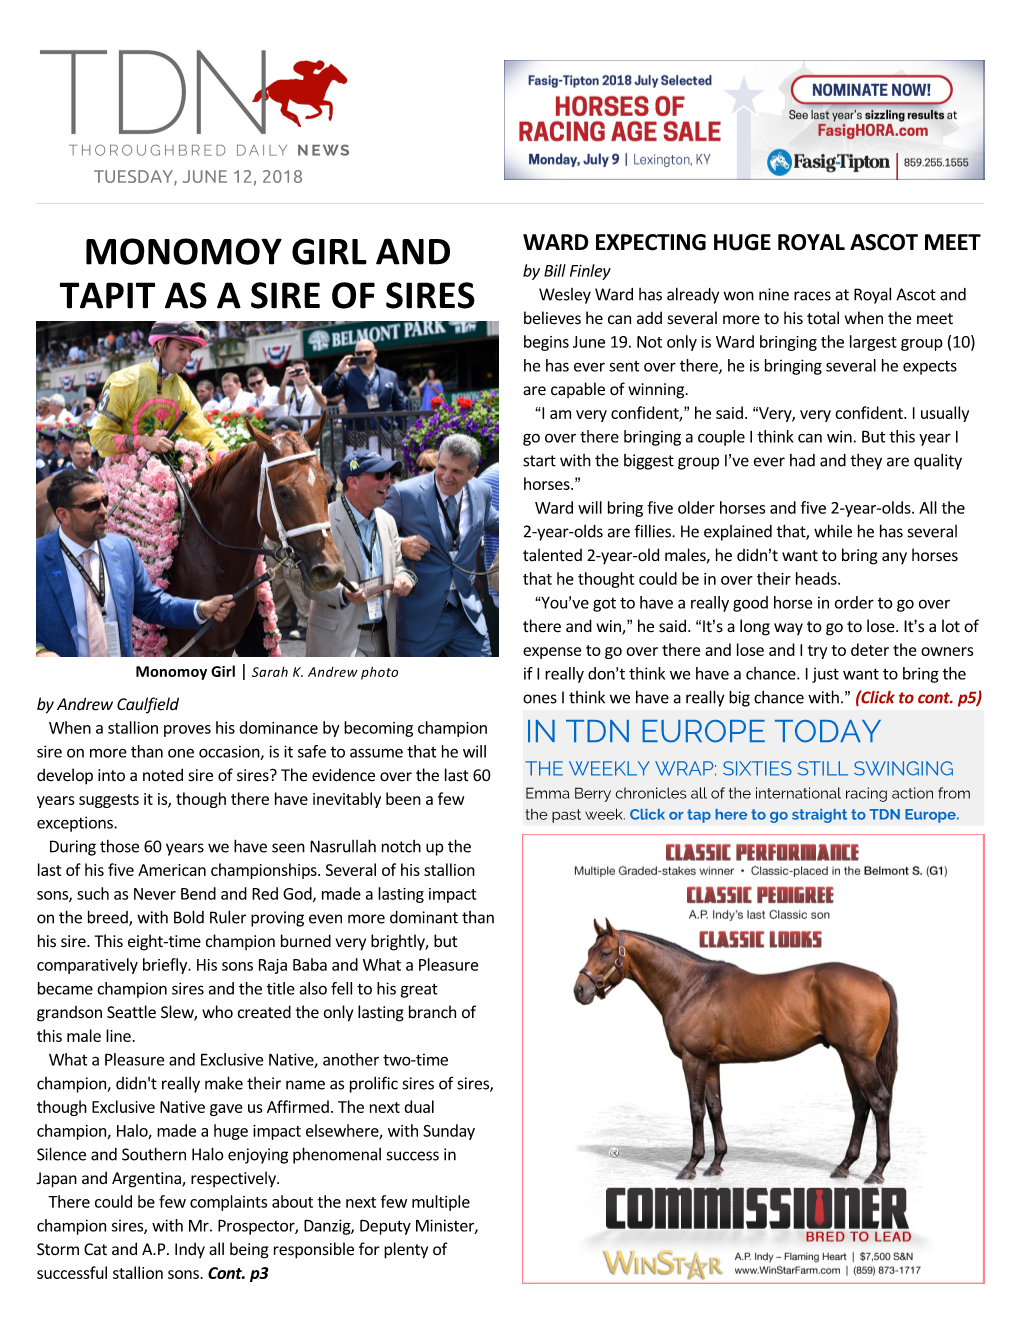 Monomoy Girl and Tapit As a Sire of Sires